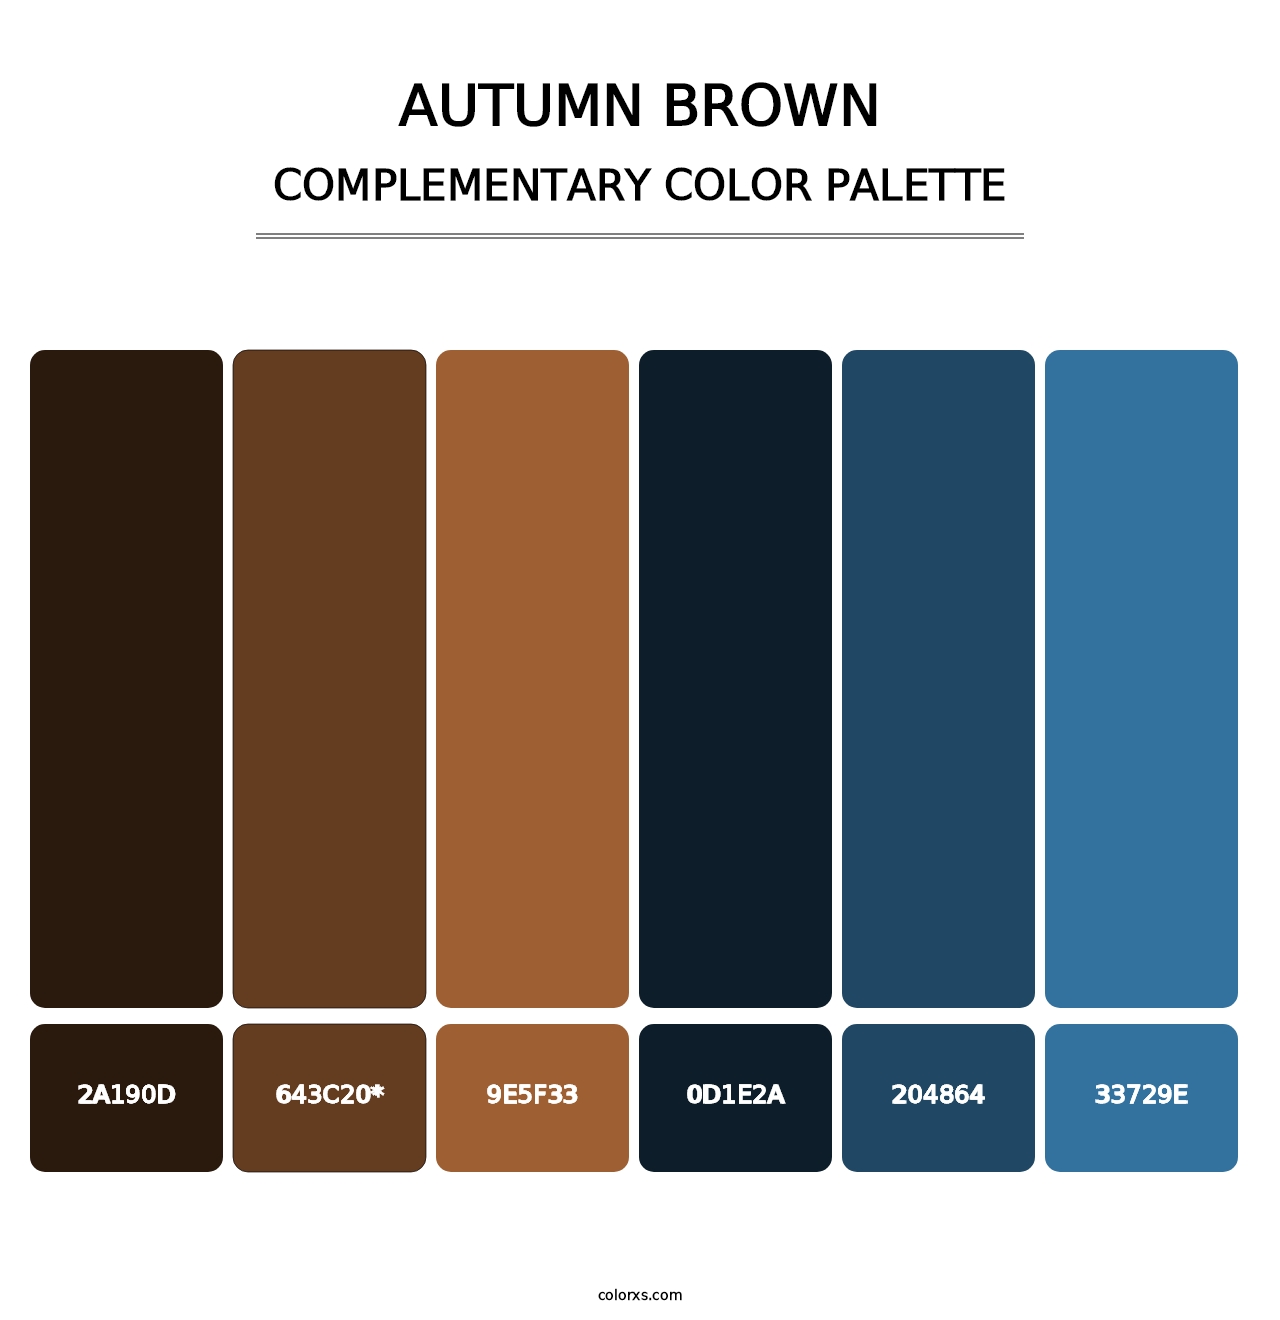 Autumn Brown - Complementary Color Palette